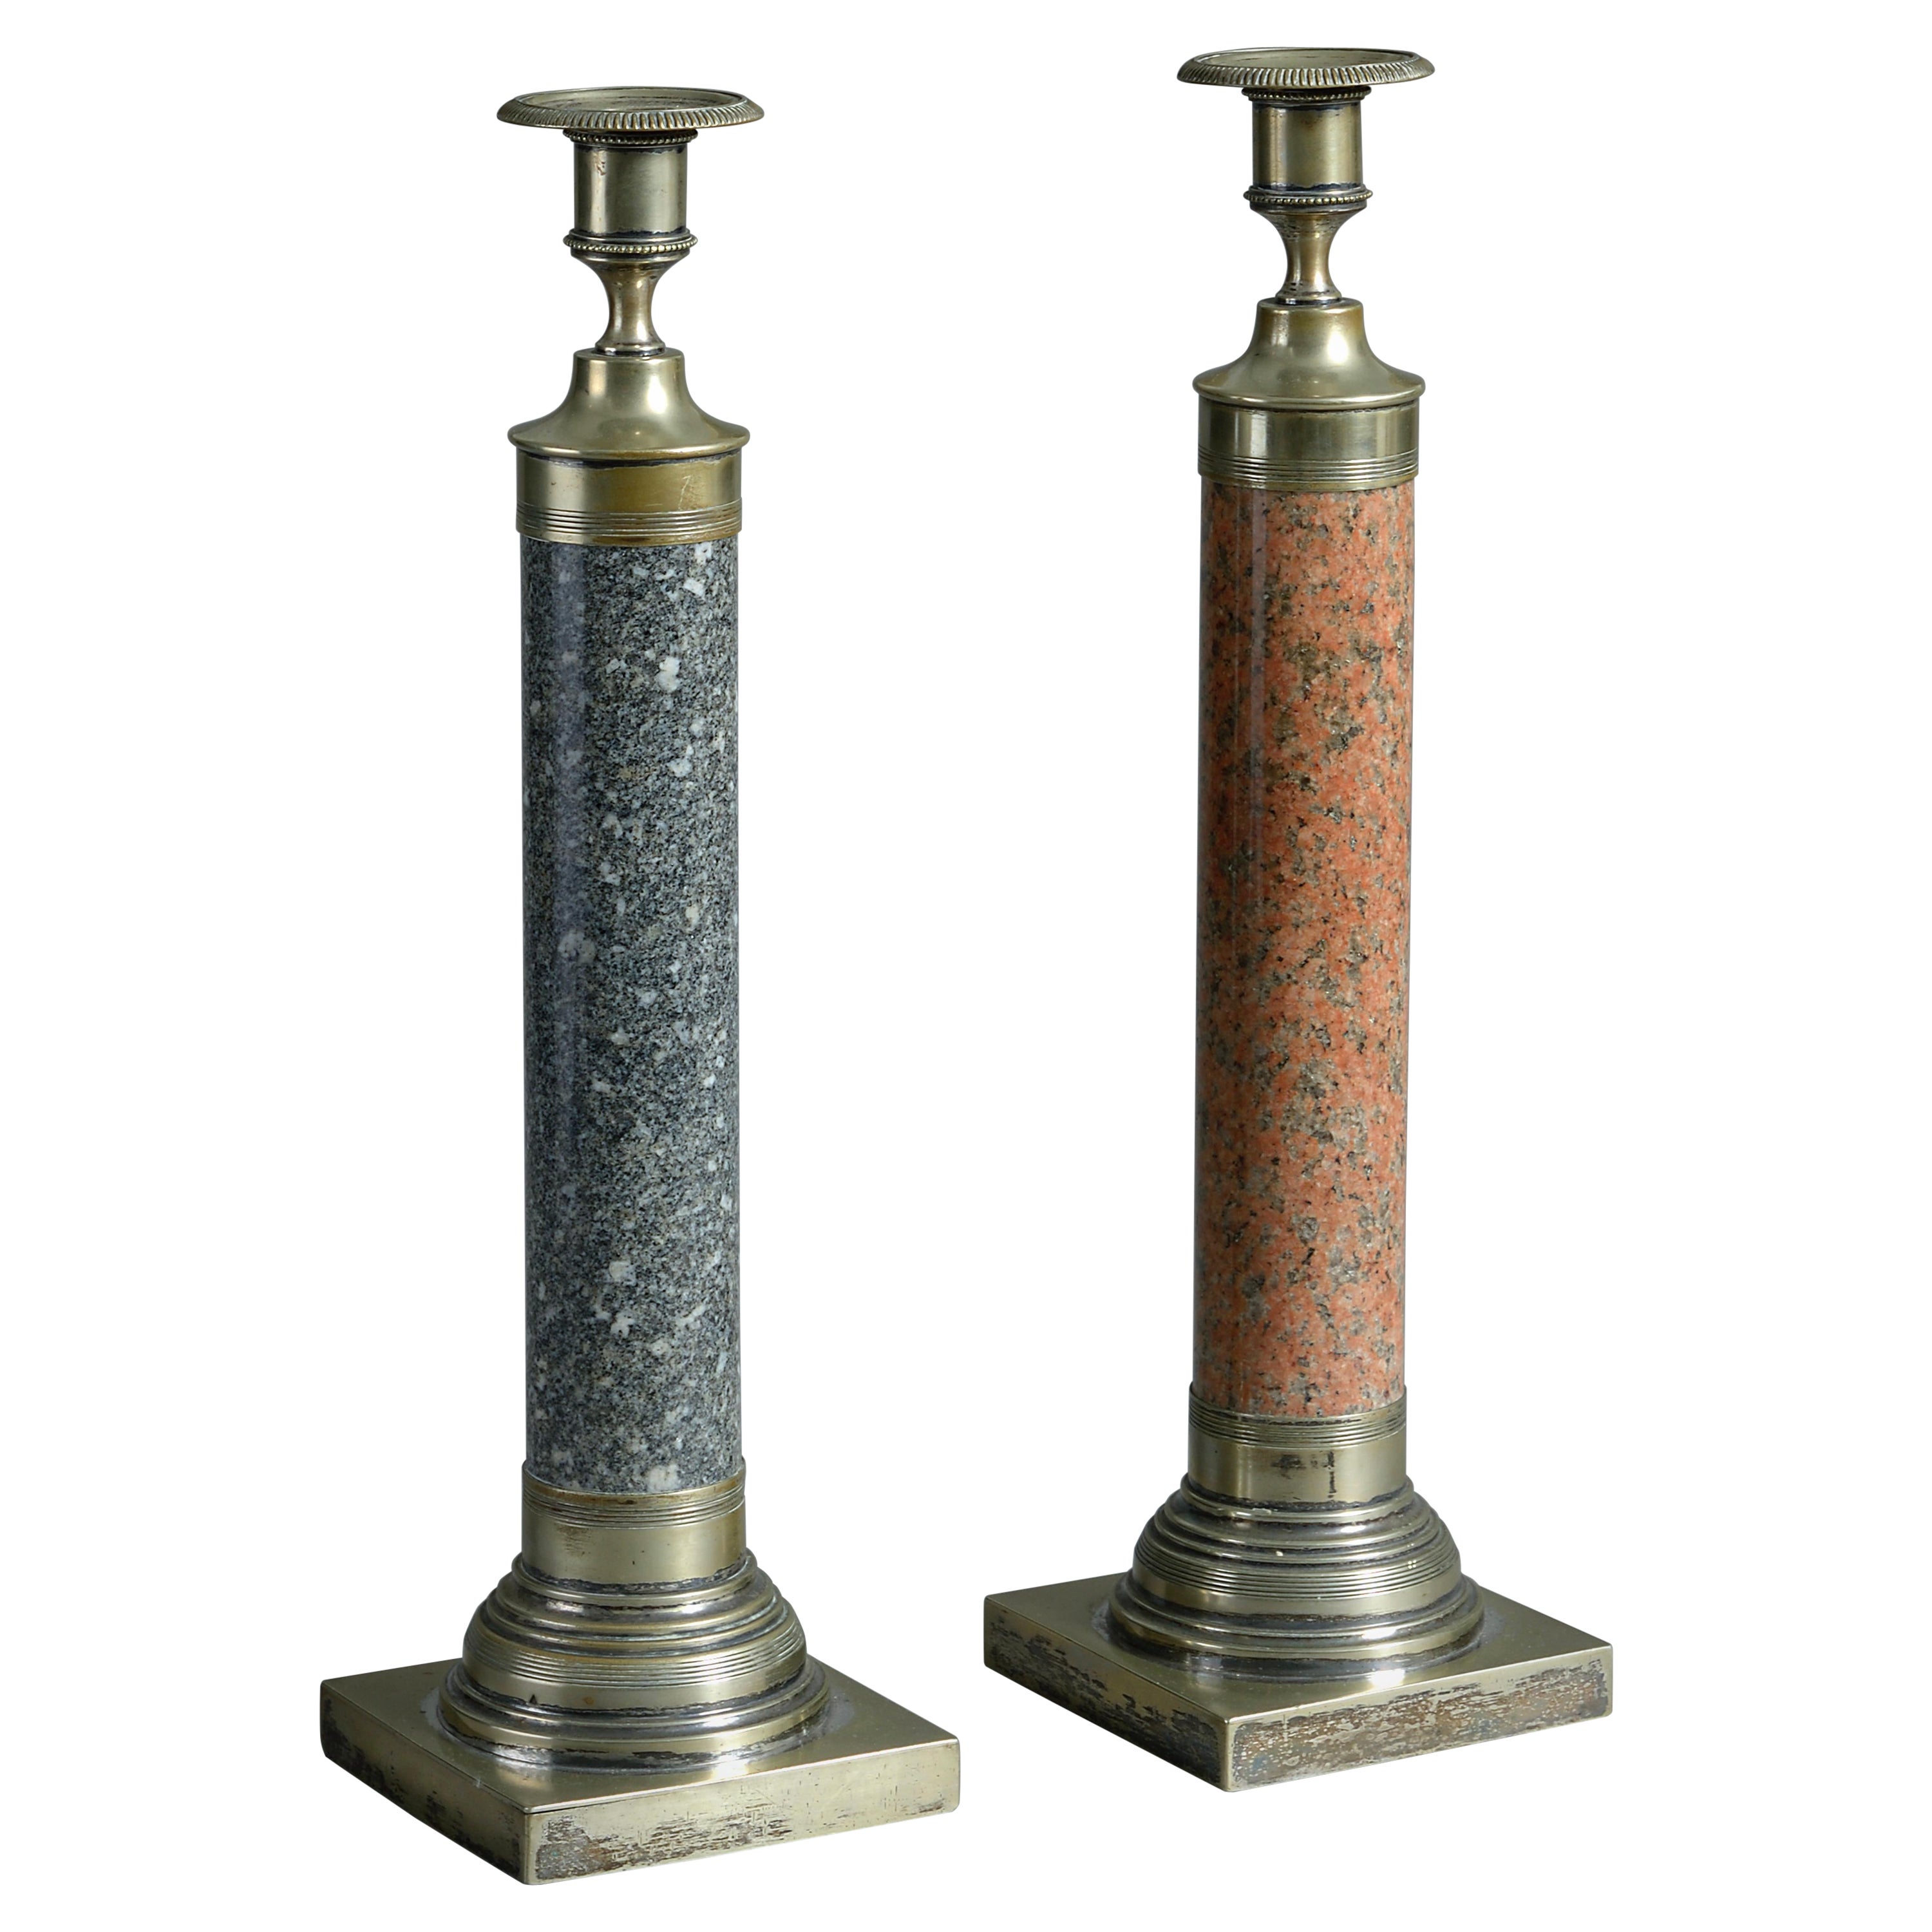 Pair of Scottish Granite and Silver-plate Candlesticks